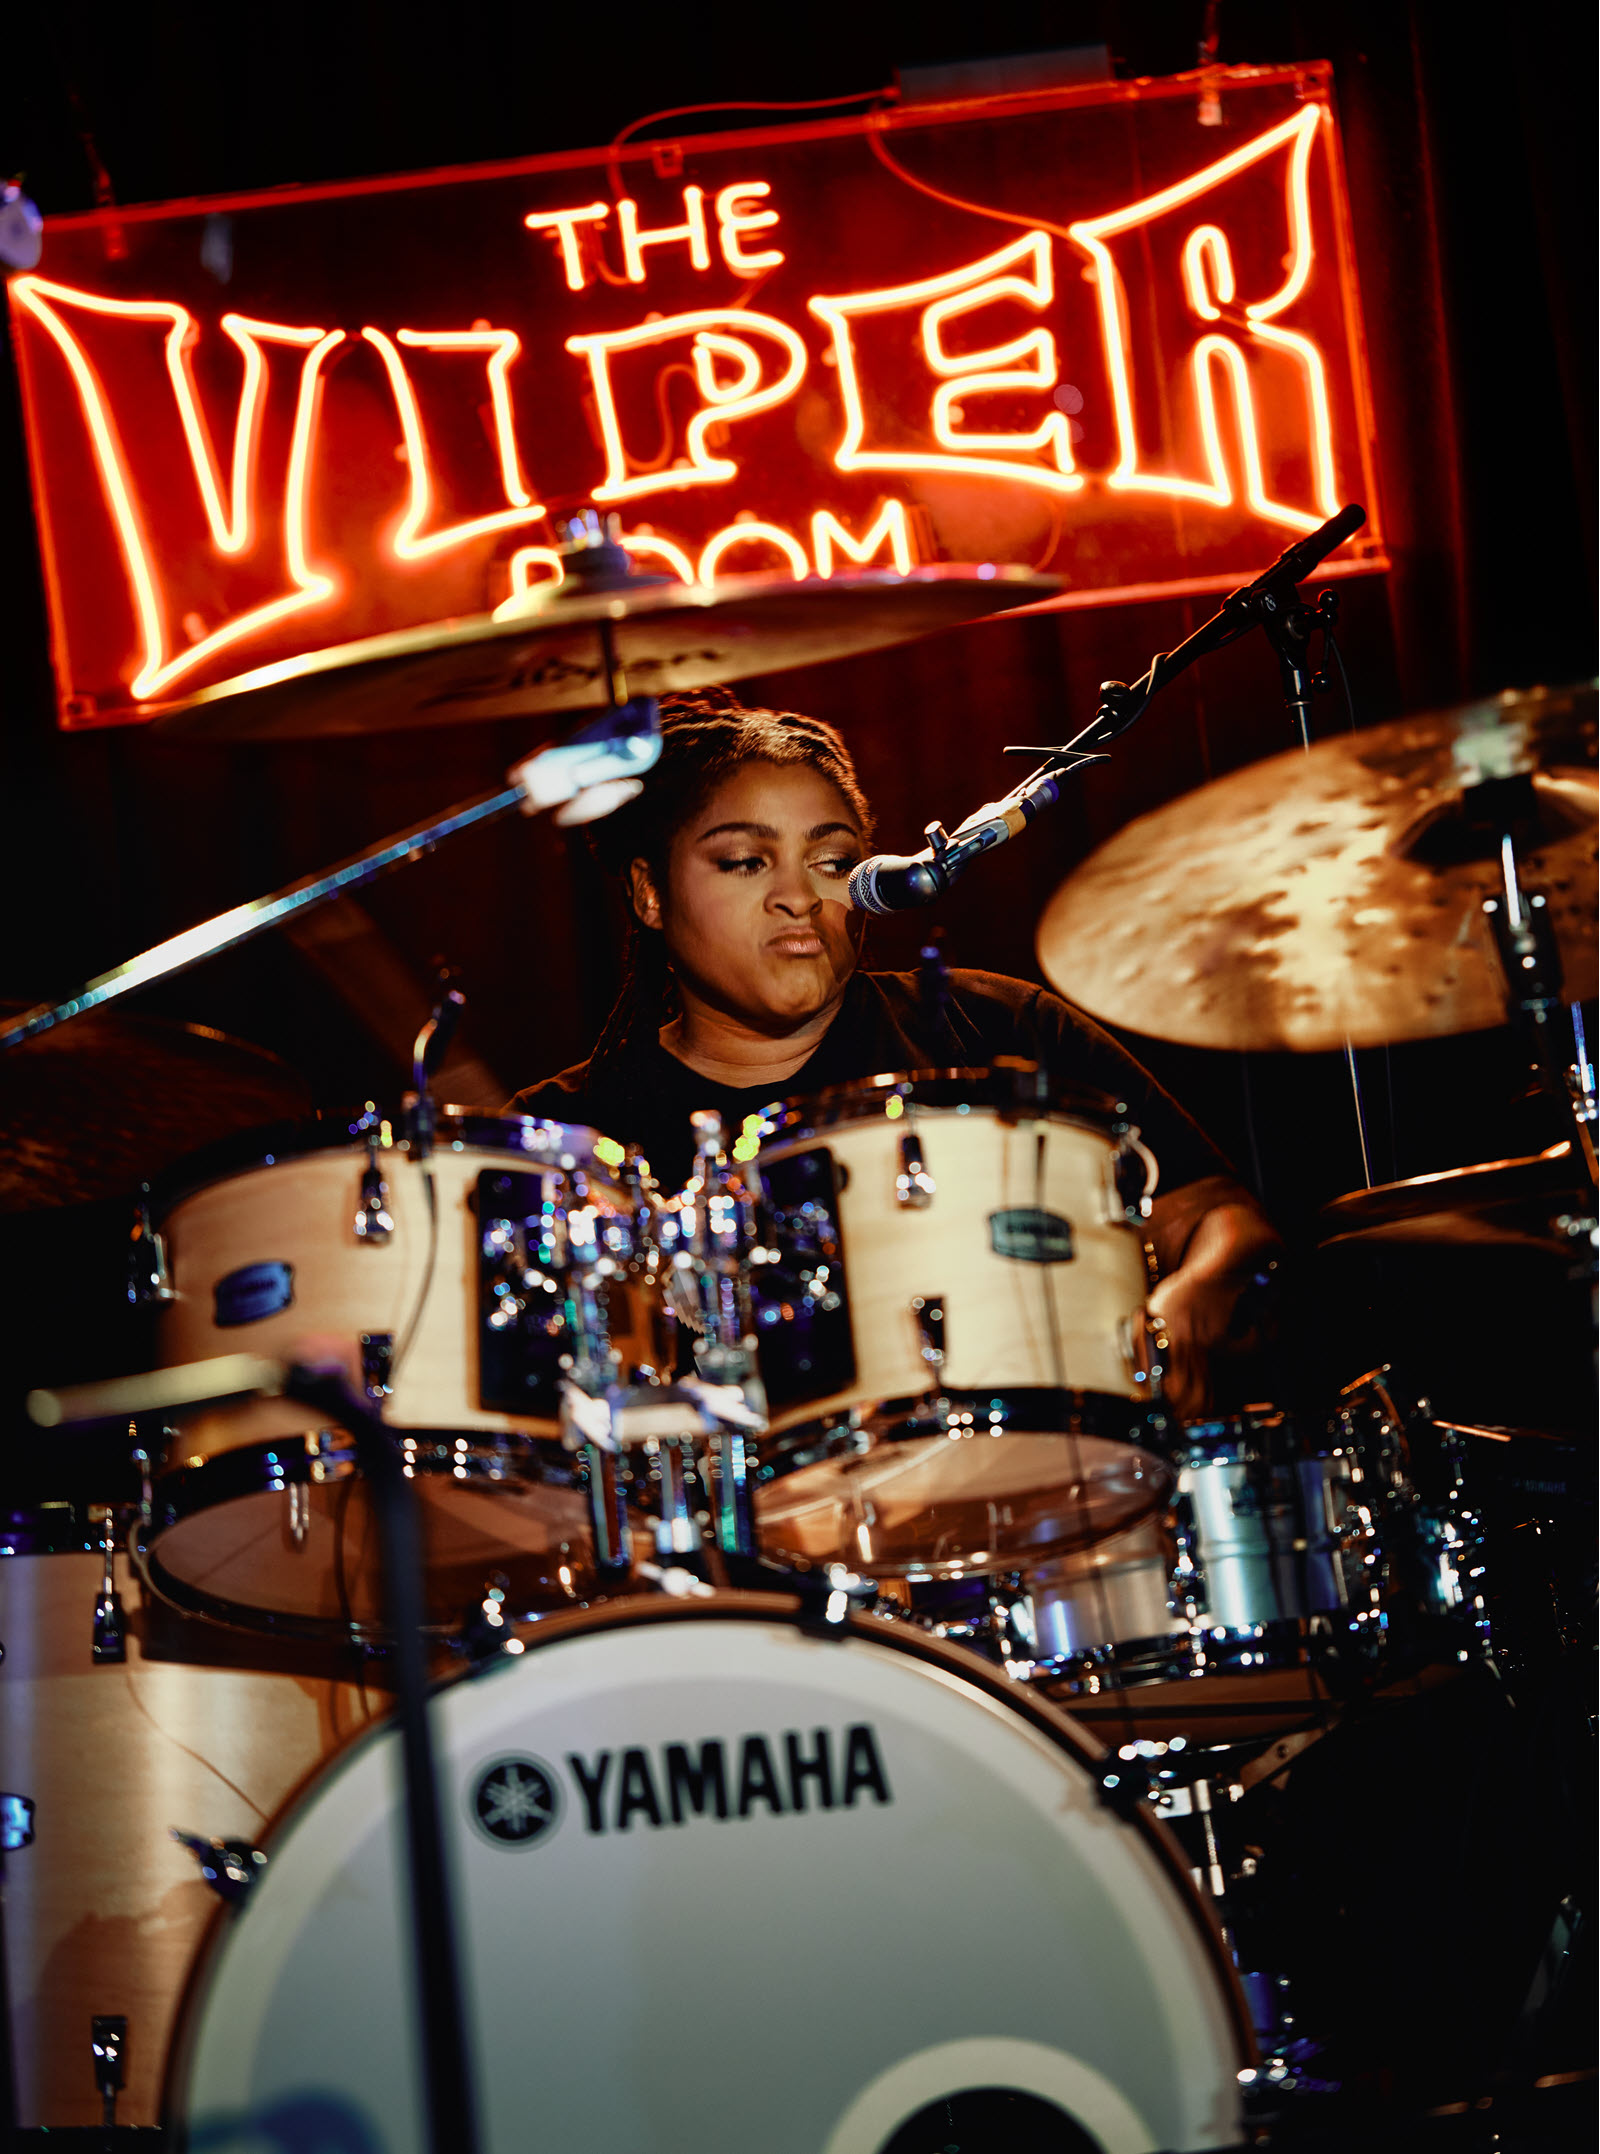 Woman playing drums with lit up sign behind her that says "The Viper Room".